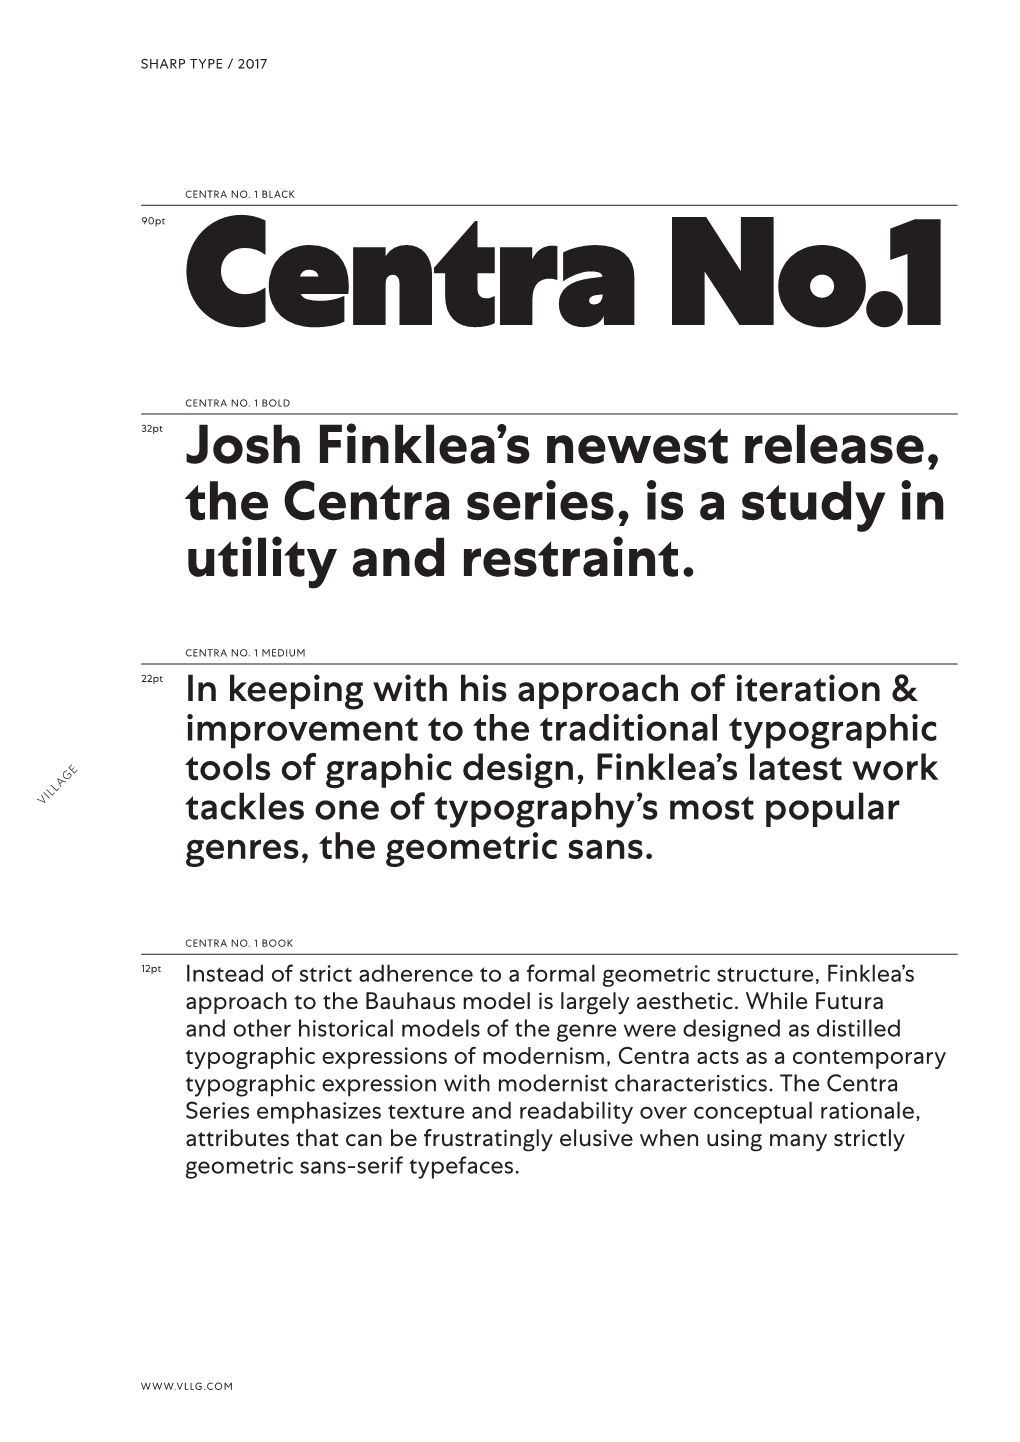 Josh Finklea's Newest Release, the Centra Series, Is a Study